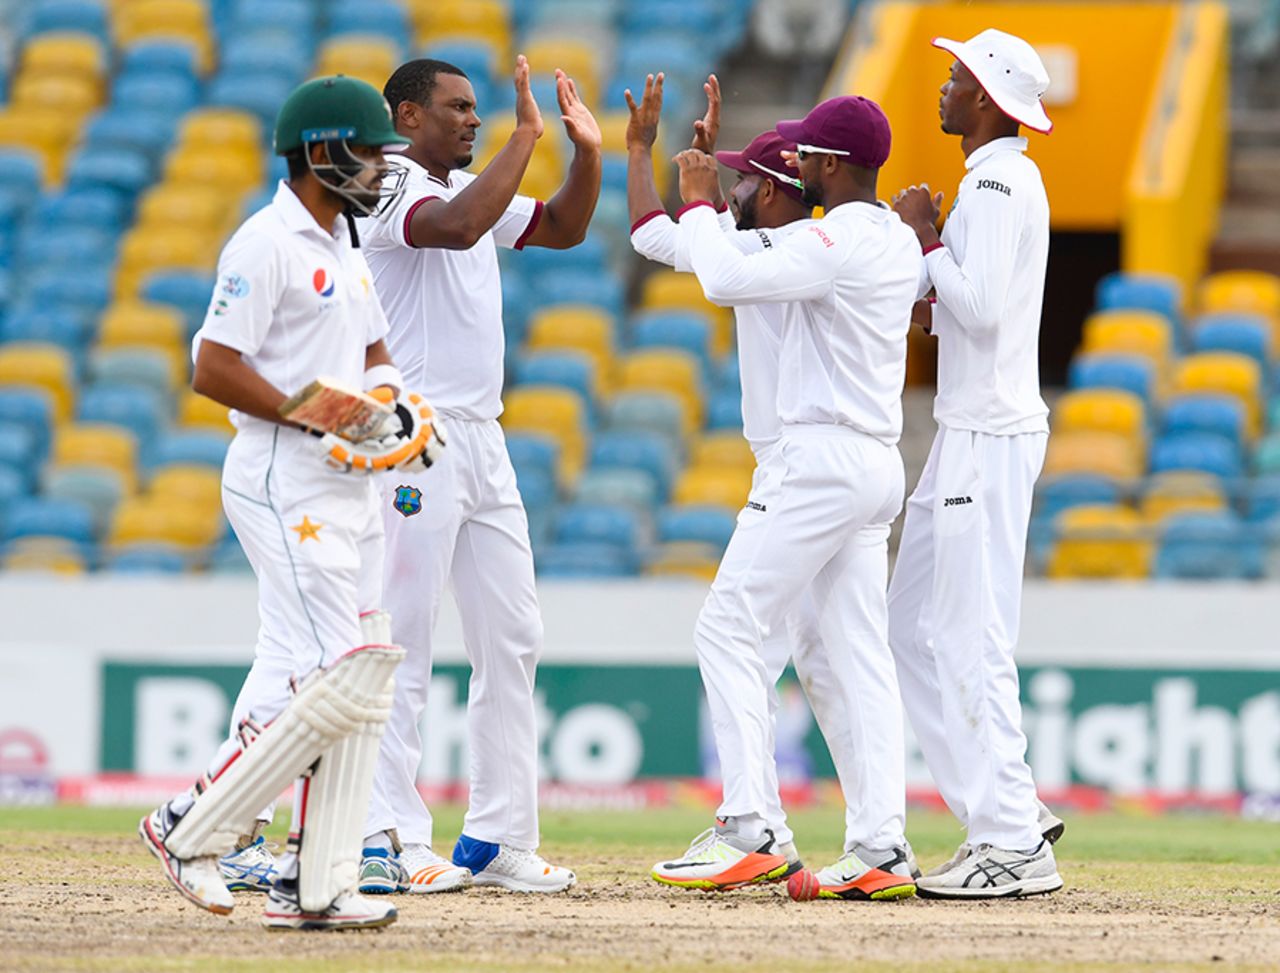 Shannon Gabriel dismissed Babar Azam for a two-ball duck, West Indies v Pakistan, 2nd Test, Bridgetown,2nd day, May 1, 2017